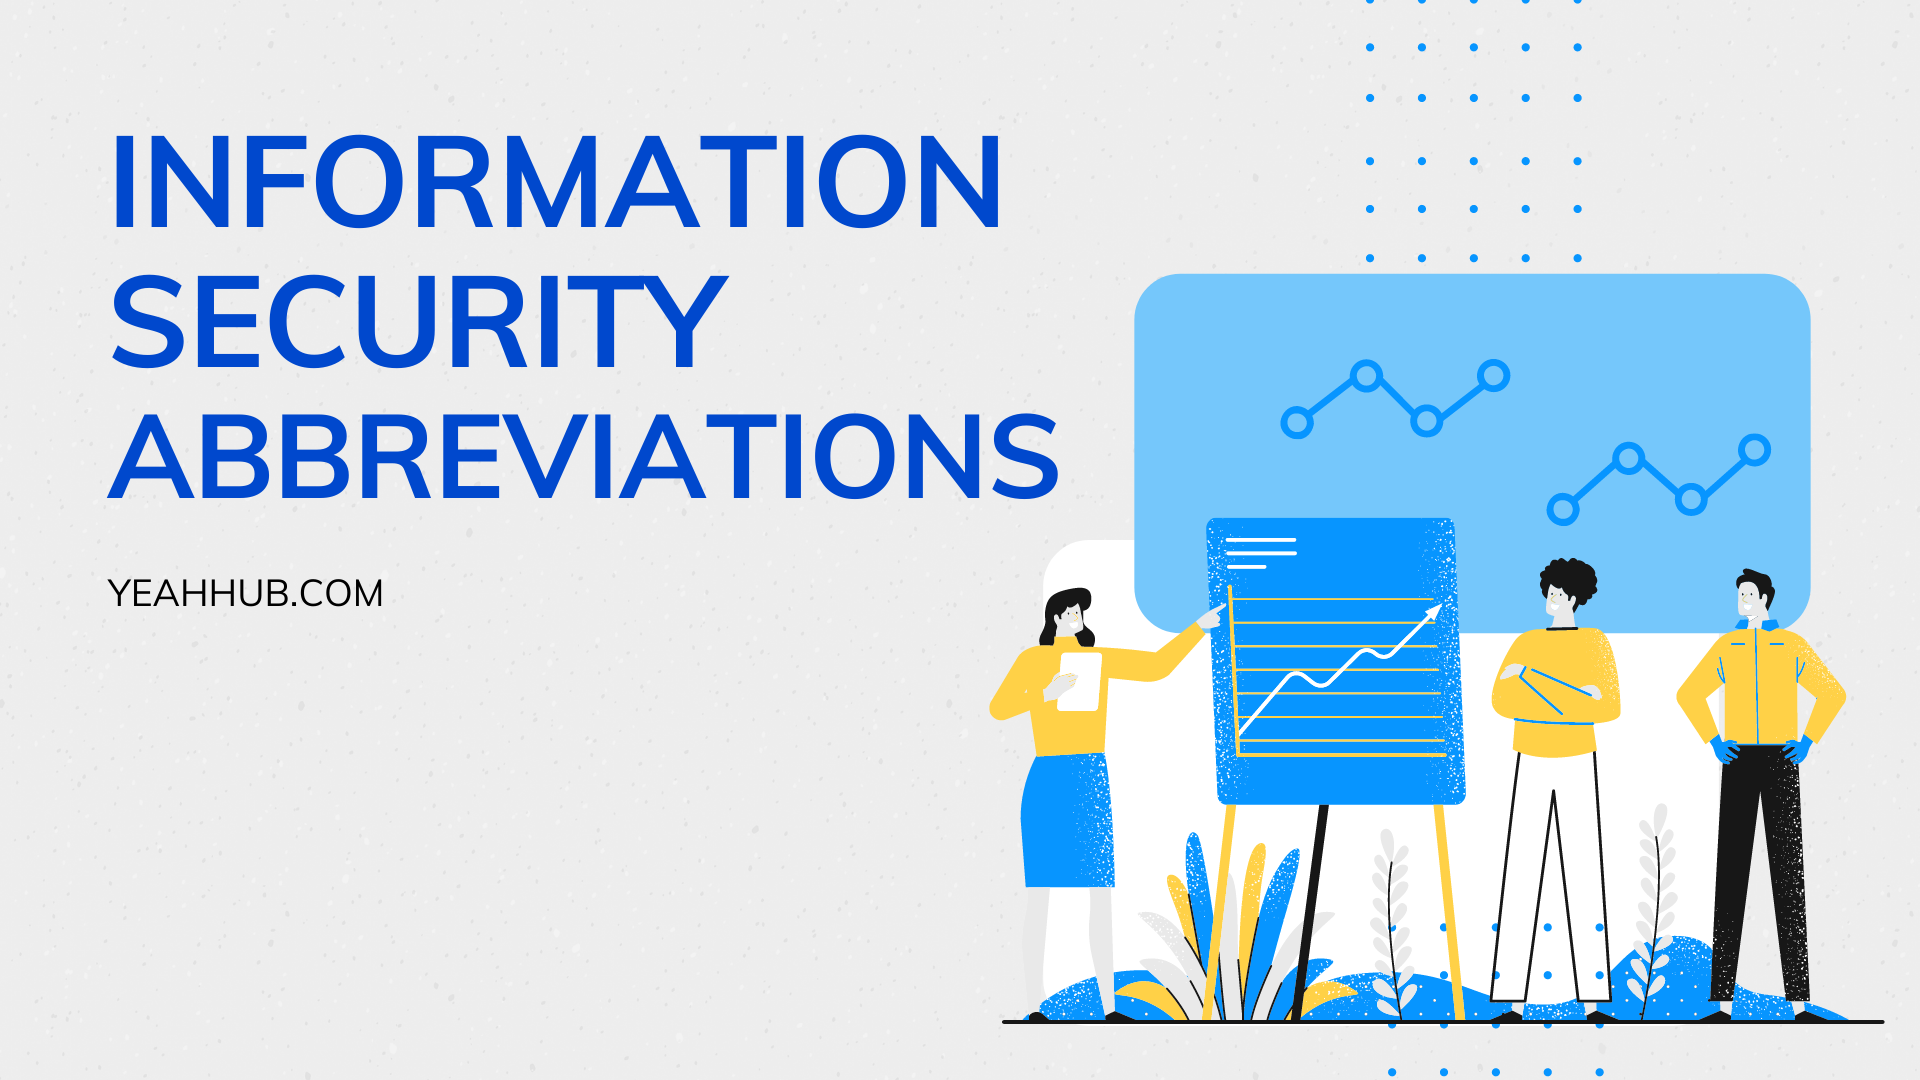 Information Security Abbreviations